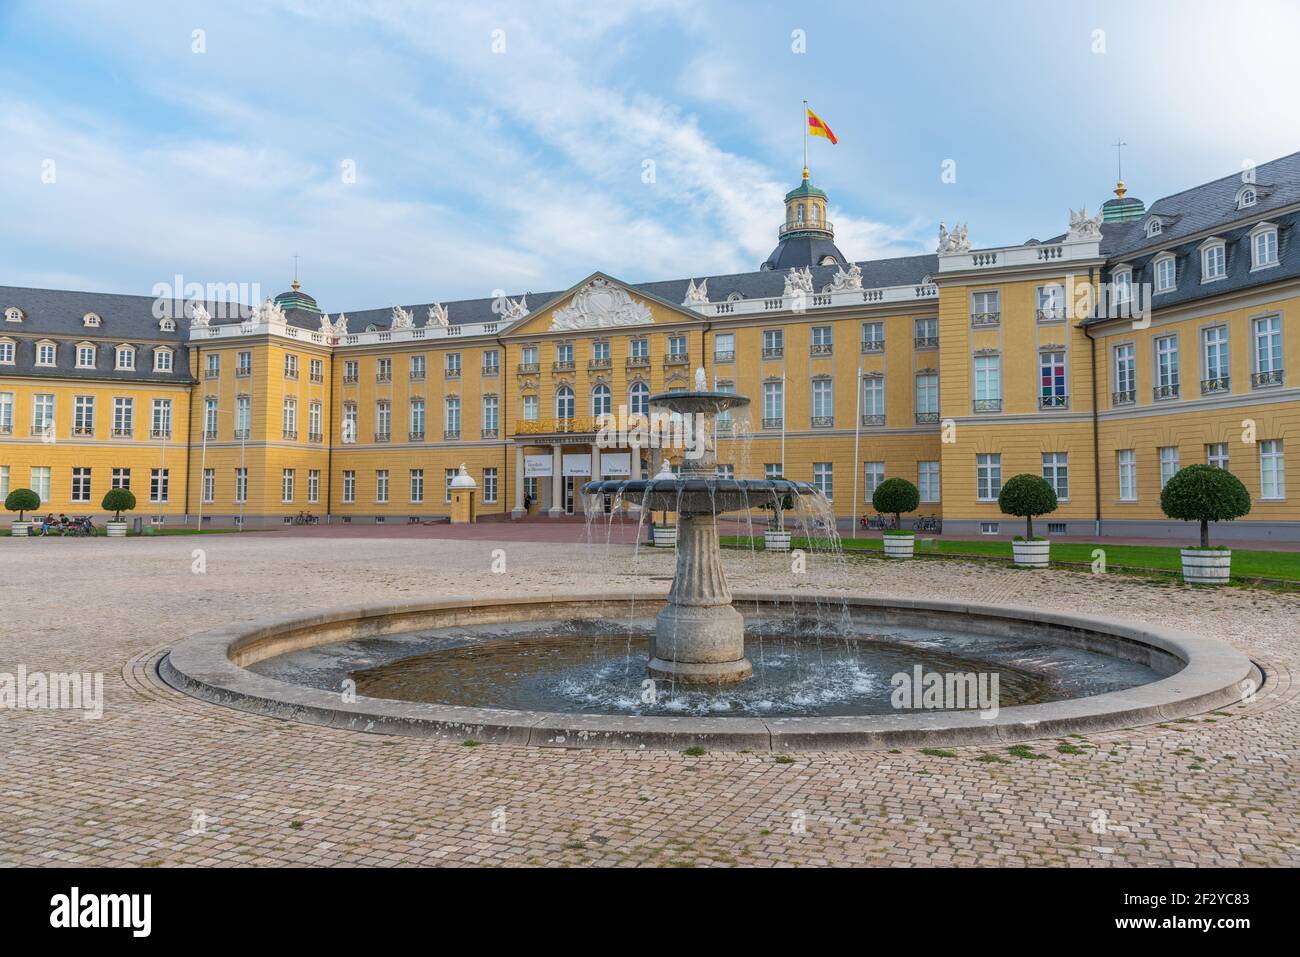 Karlsruhe palace during a sunny day in Germany Stock Photo